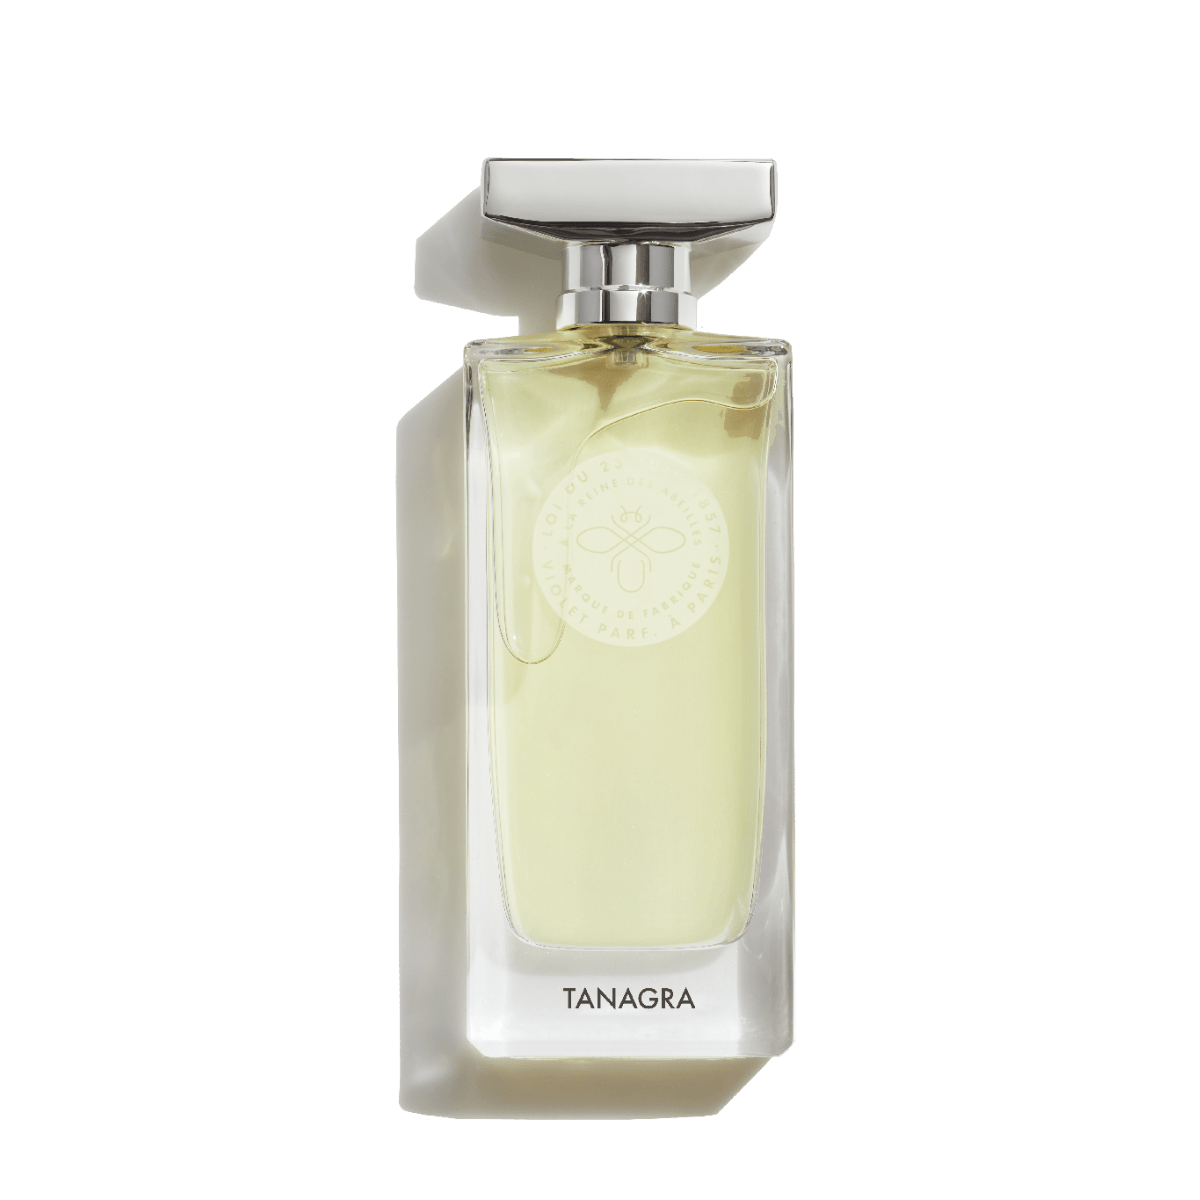 Image of Tanagra 75 ml by the perfume brand Violet